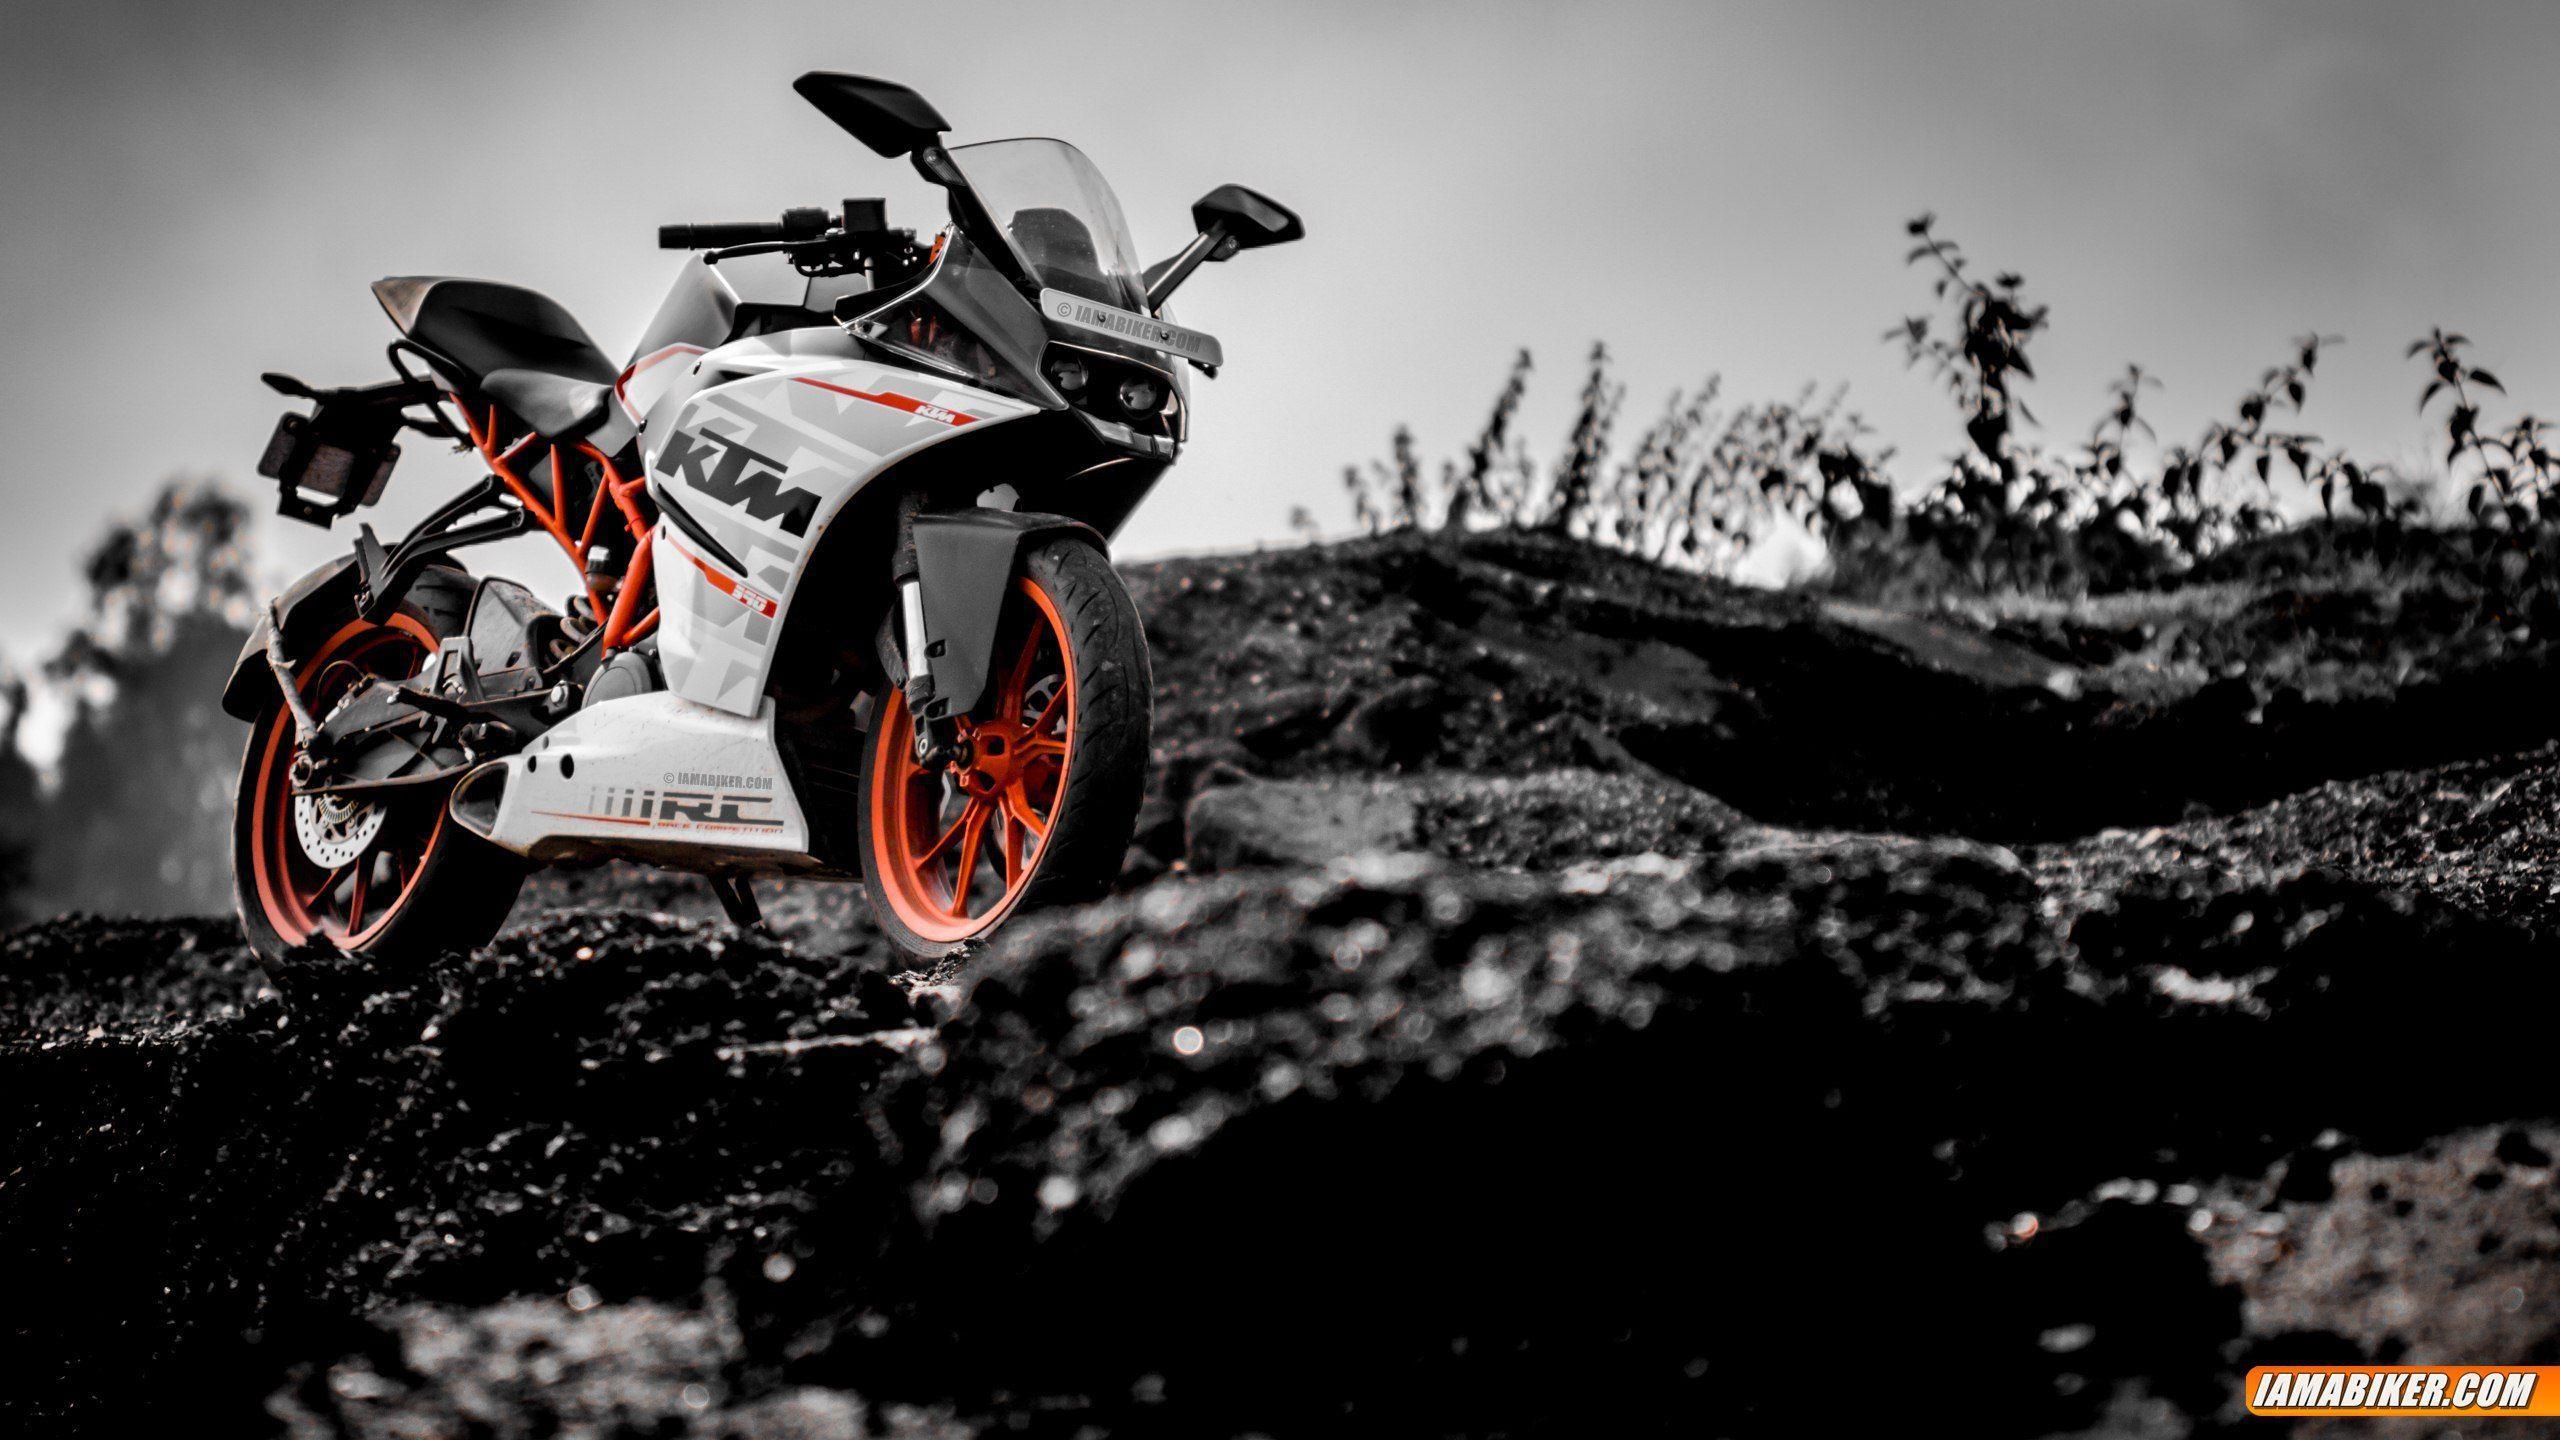 ktm rc390 ktm rc 390 wallpapers ktm rc 390 hd wallpapers ktm rc